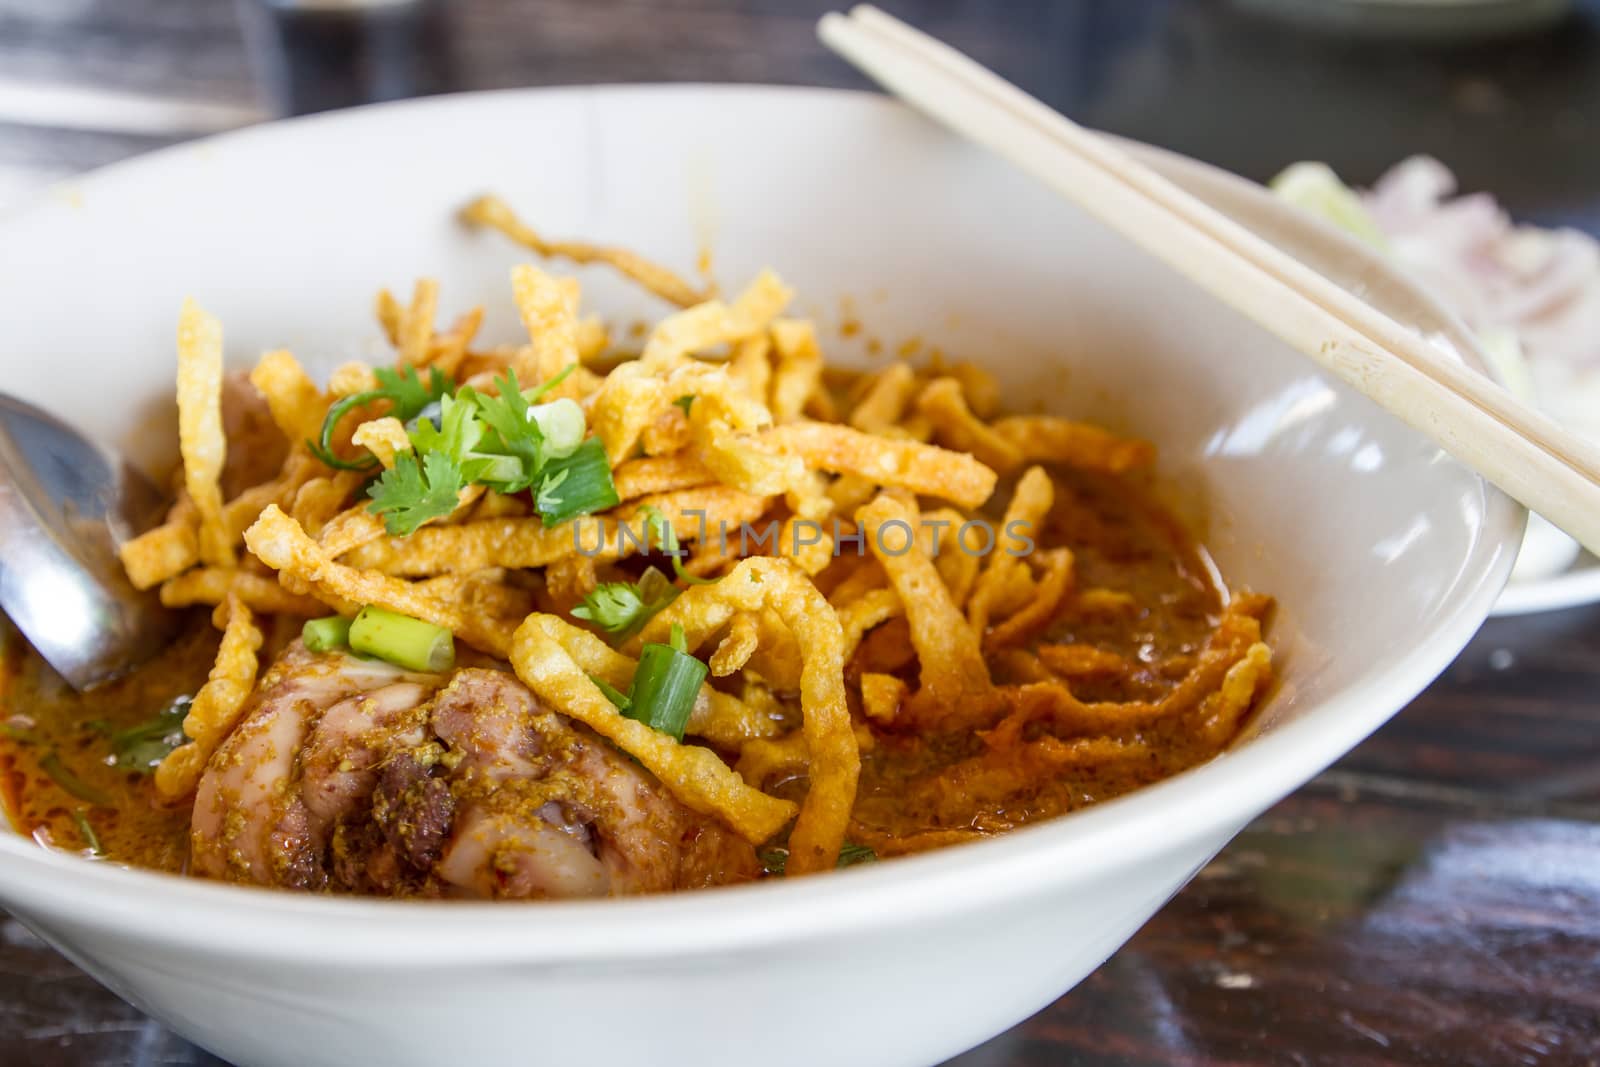 Khao Soi, Northern Thai Noodle Curry Soup - Northern Thai traditional food